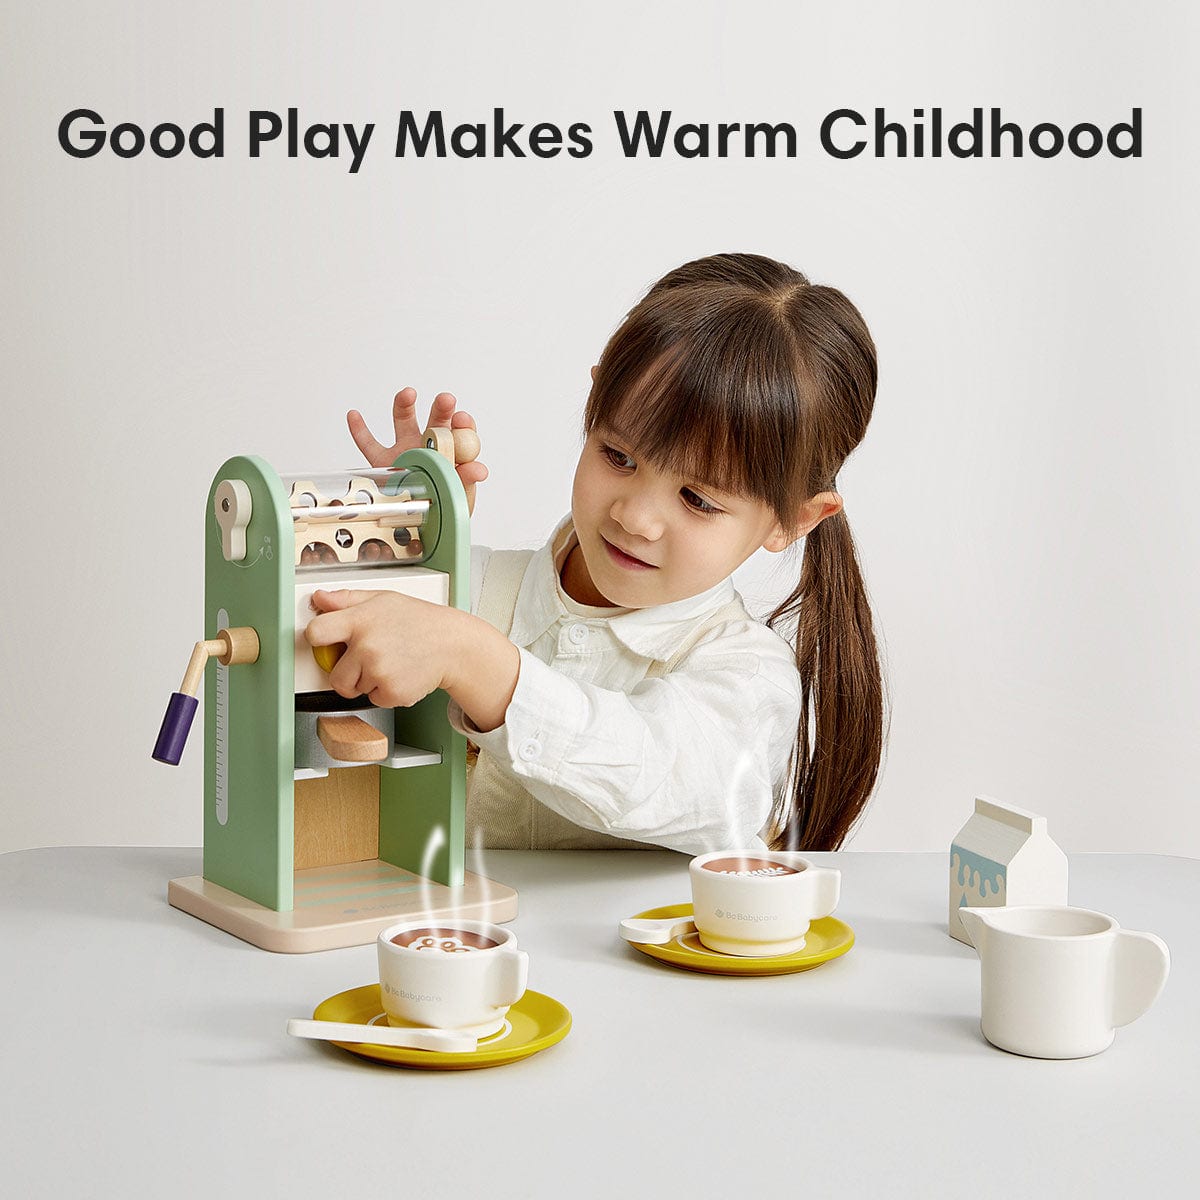 Nothing But Fun Toys My First Coffee Maker Playset Designed for Children  Ages 3+ Years 